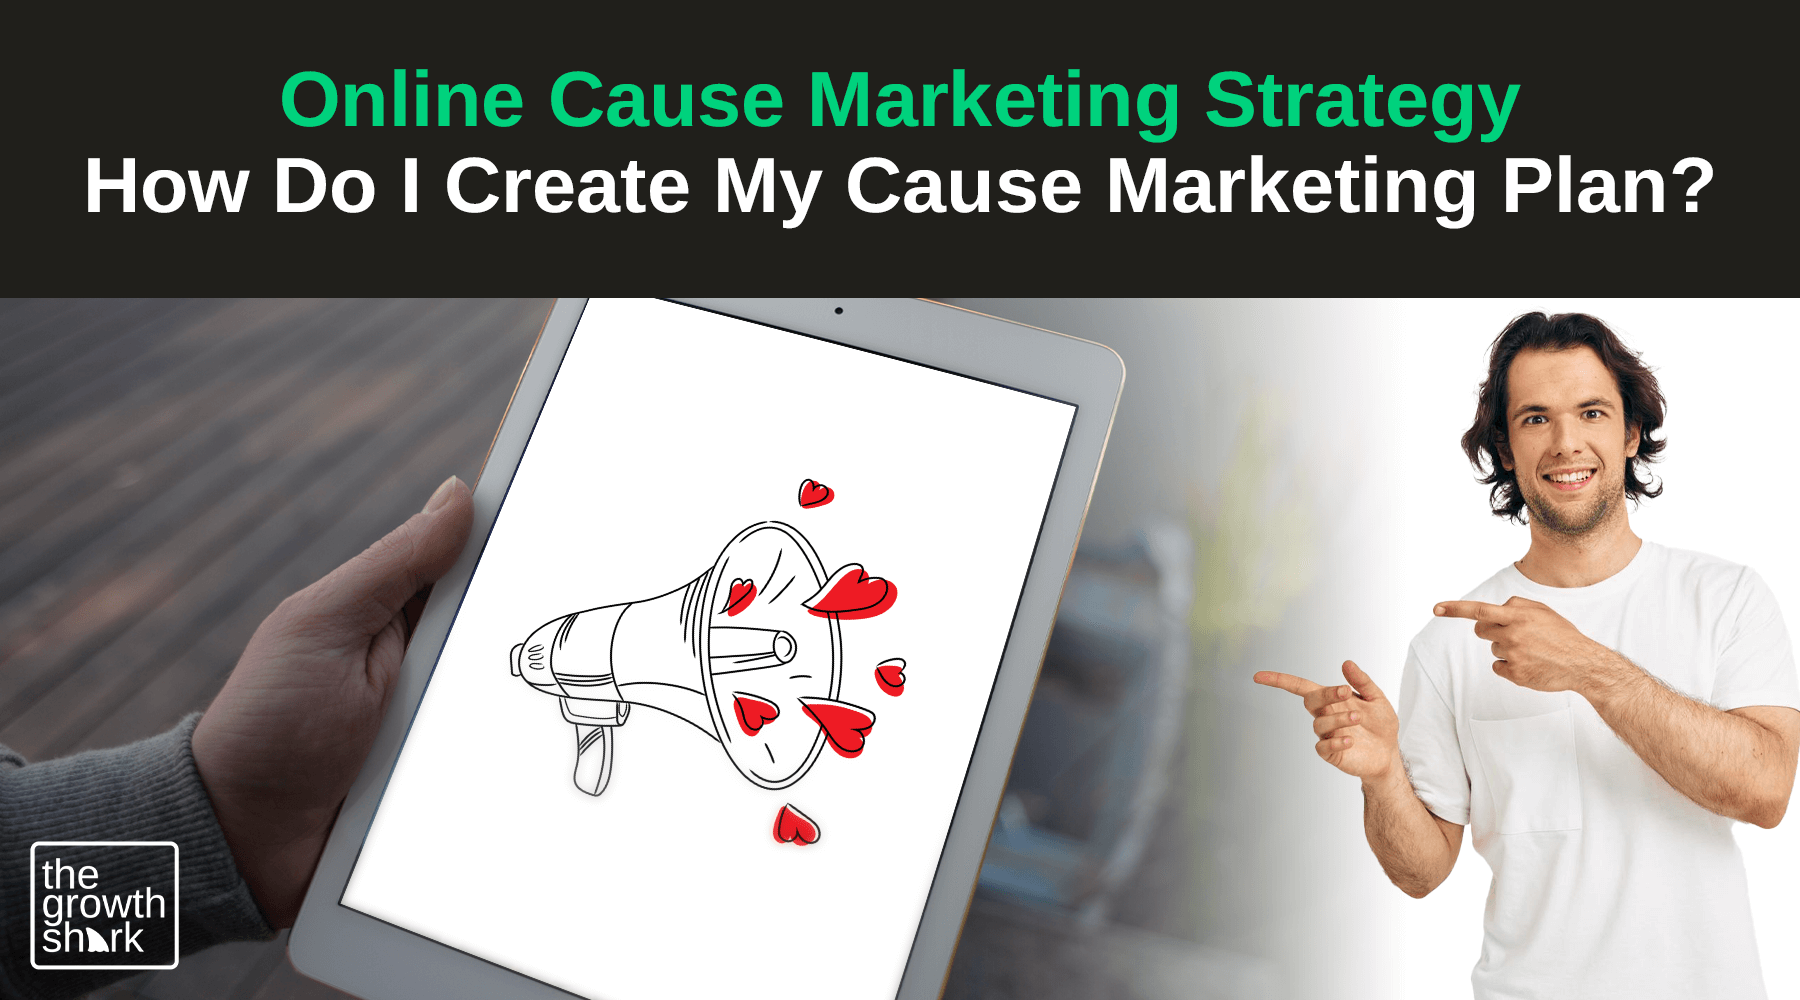 How to create online cause marketing strategy?